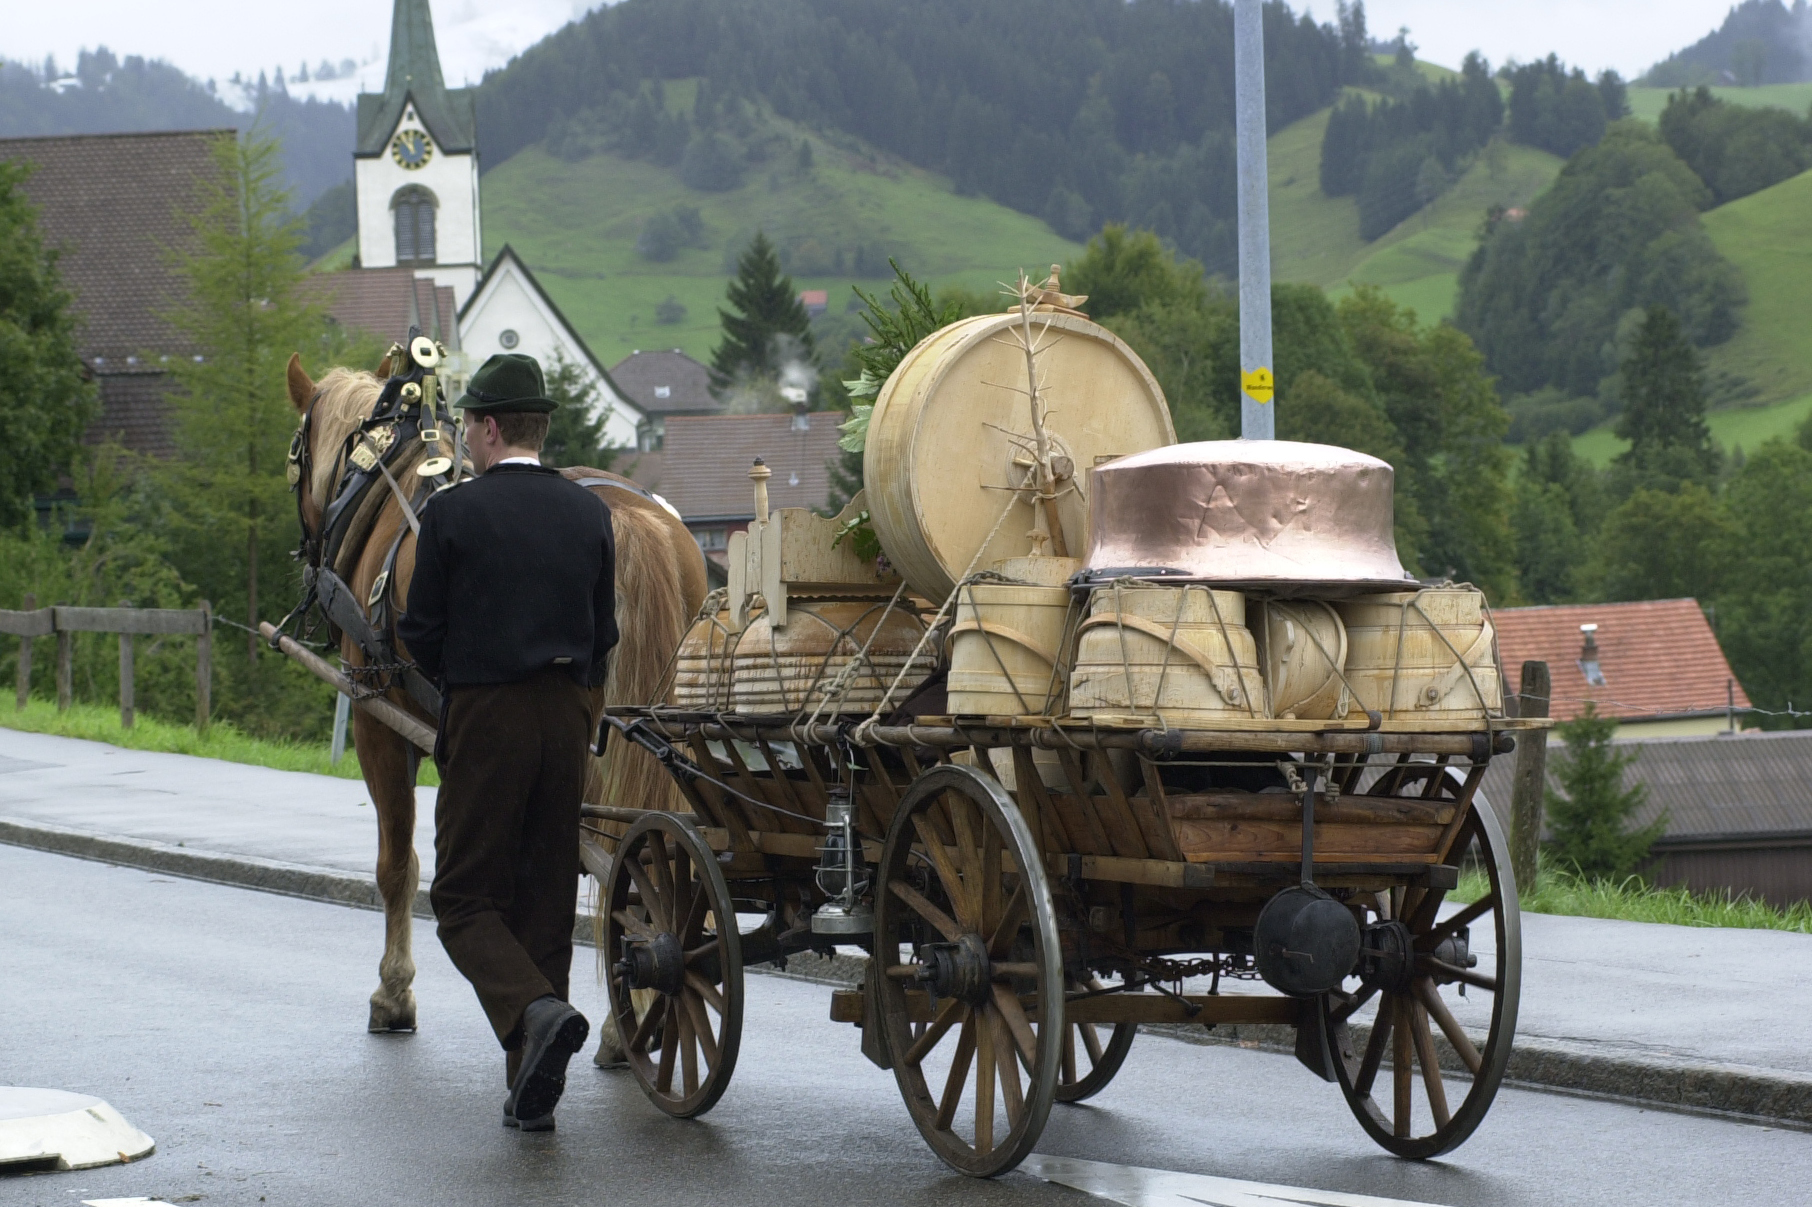 Descent, Scheidweg Urnäsch: To respect tradition, some farmers bring up the rear of the parade with a cart carrying wooden crockery, even though these items are no longer used © Hans Hürlemann, Urnäsch, 2001